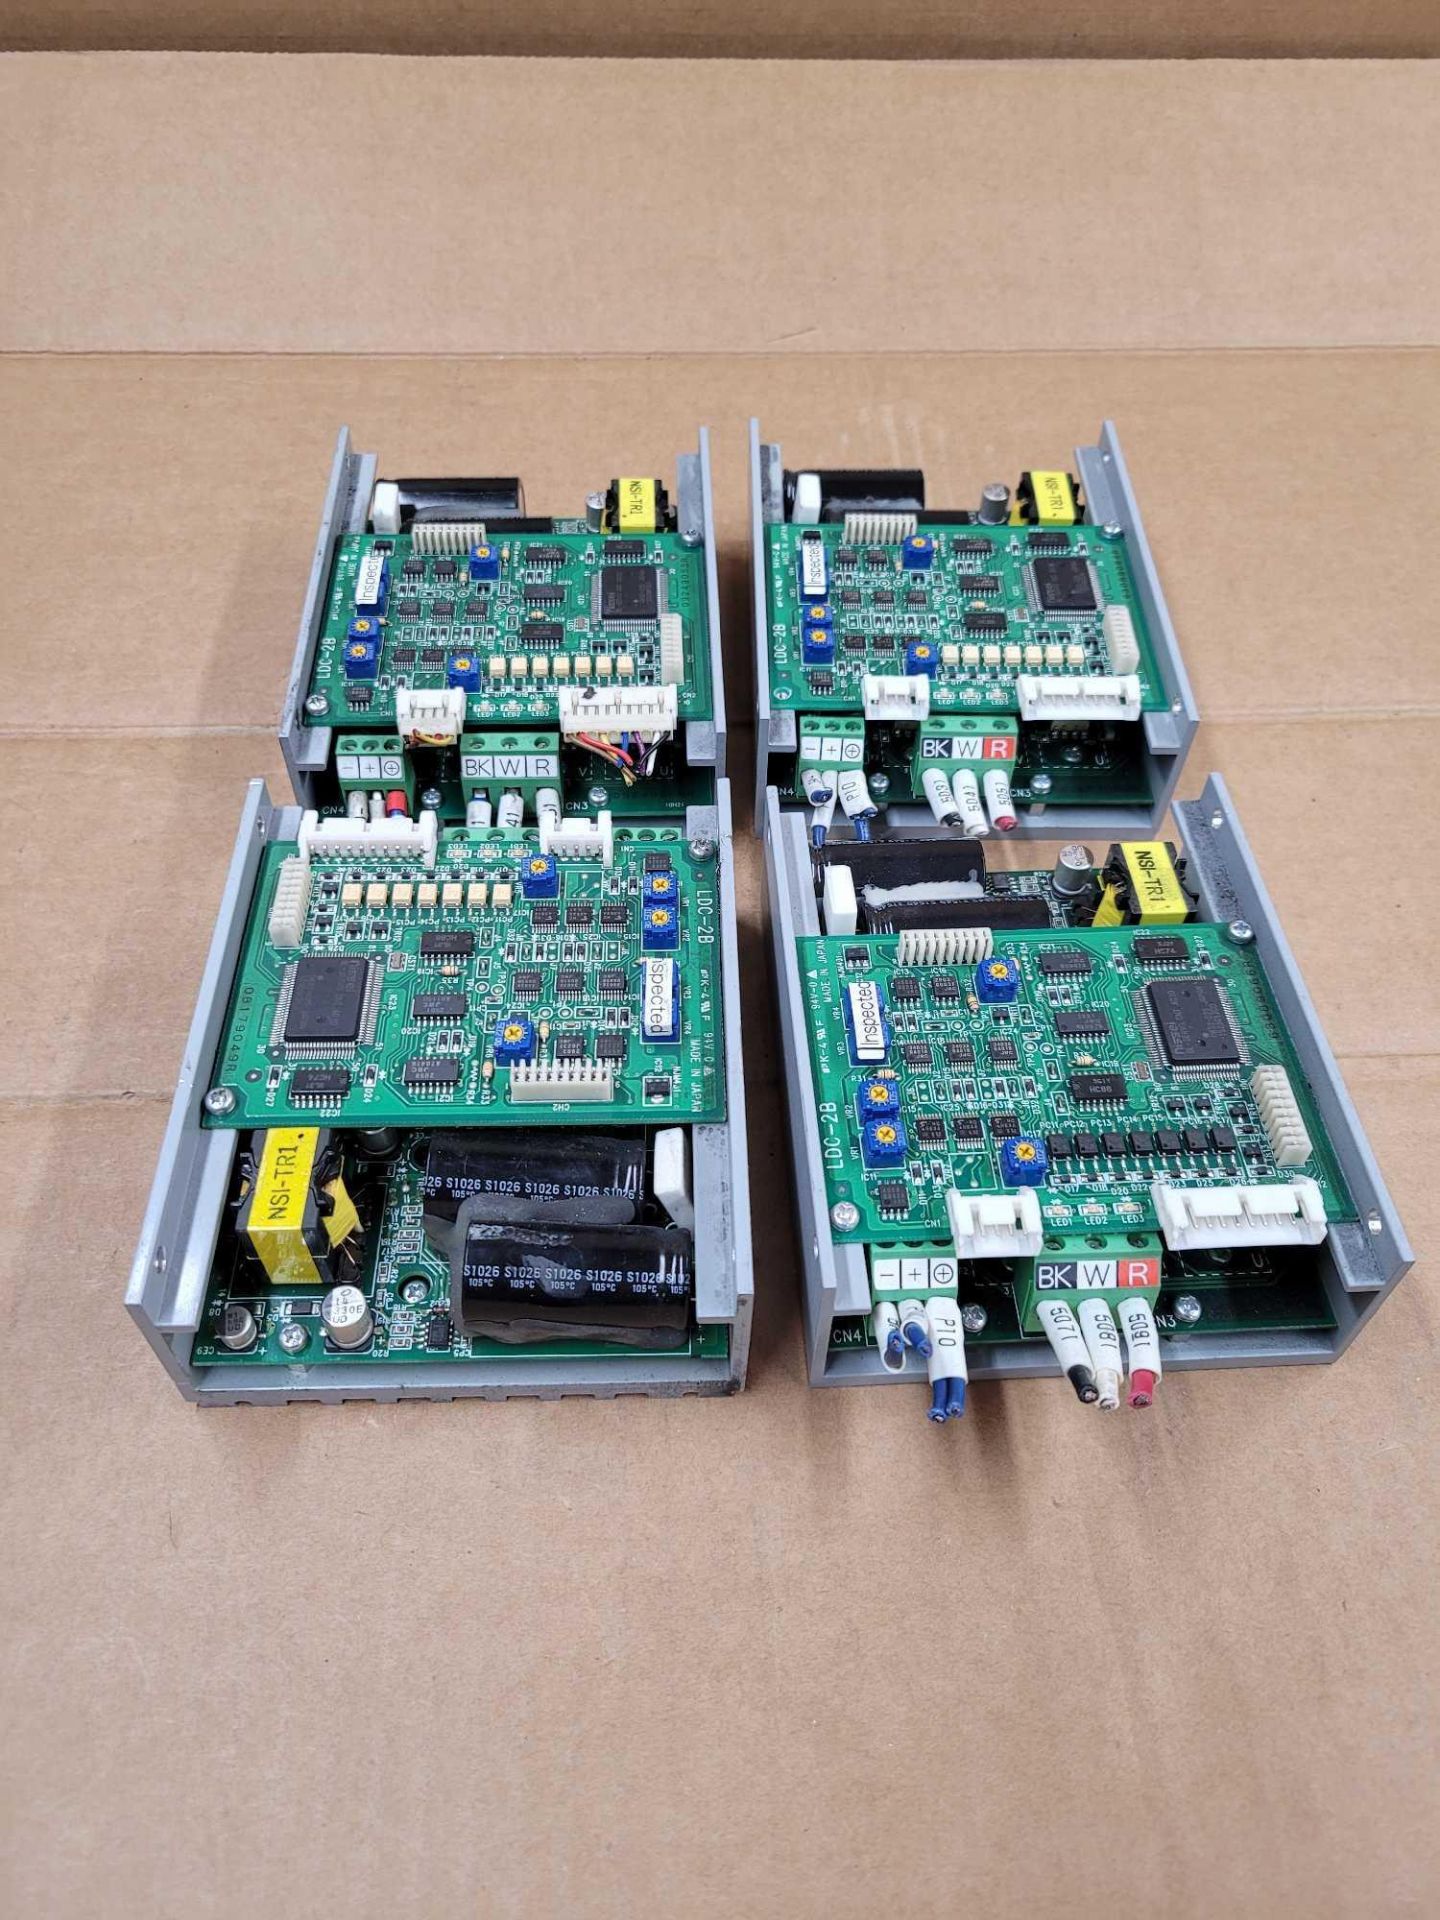 LOT OF 4 CREFORM BV2-B002A(24V) / Motor Driver from Creform AGV Tugger  /  Lot Weight: 4.0 lbs